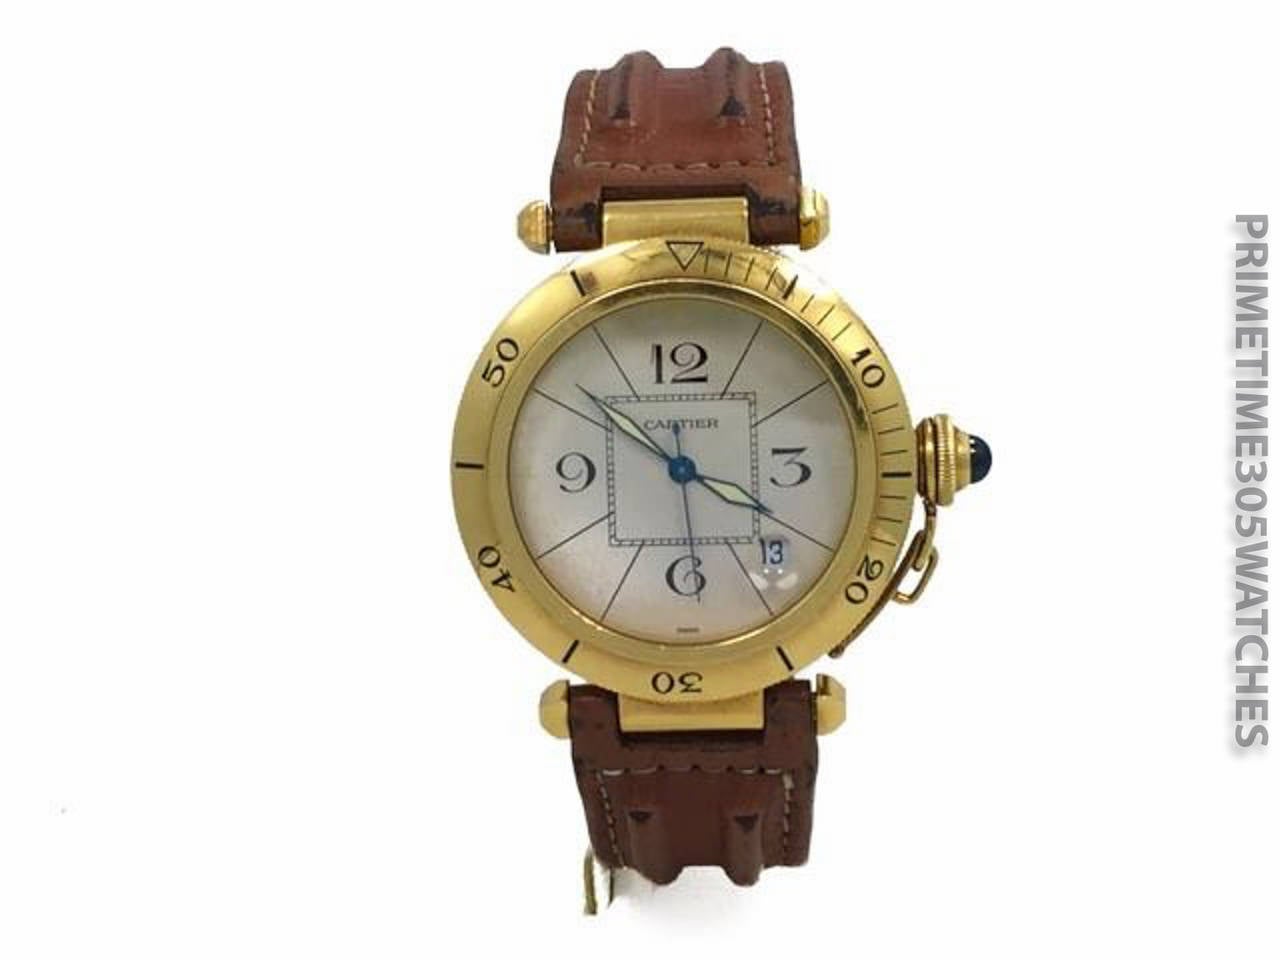 Mens Cartier Pasha in 18k Yellow Gold On Leather Strap. The Watch is in Excellent Condition and Keeping Perfect Time, Movement is Powered by Automatic Mechanical Winding. The Watch is on a bit worn Cartier Strap & Cartier 18k GP Tang Buckle. No Box